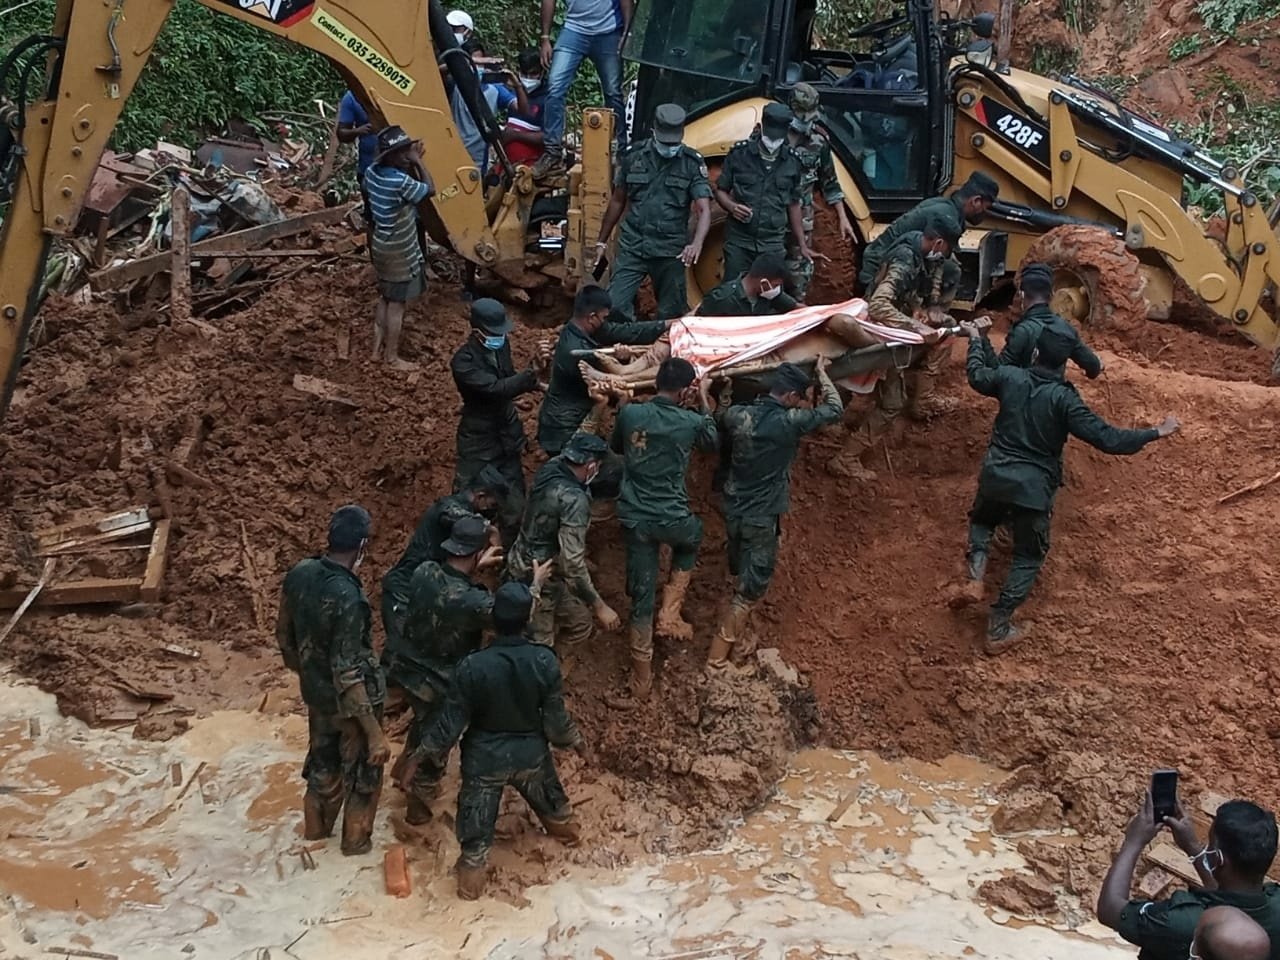 Sri Lanka army soldiers recover a dead body after a residential house collapsed due to a landslide caused by heavy rainfall in Galigamuwa, a divisional secretary area in Sri Lanka, Nov. 10, 2021. (Reuters Photo)